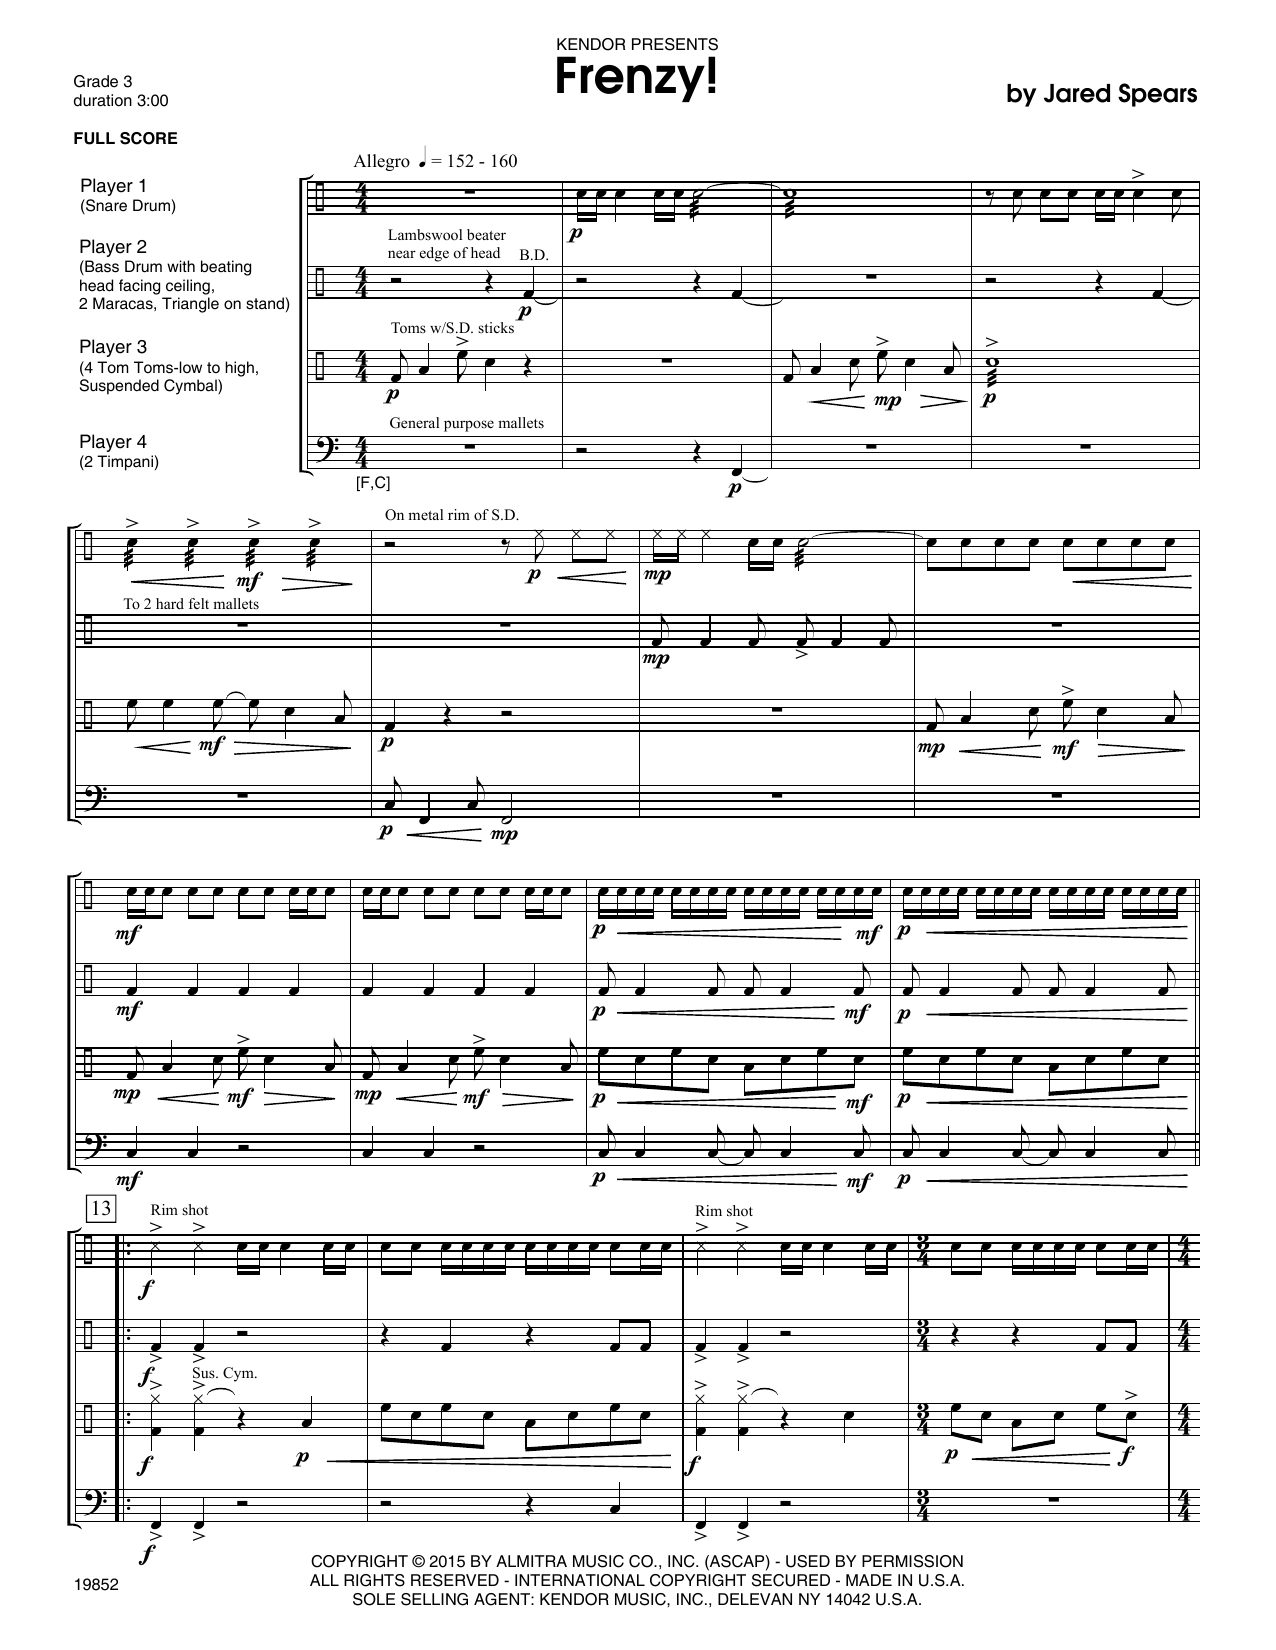 Download Jared Spears Frenzy! - Full Score Sheet Music